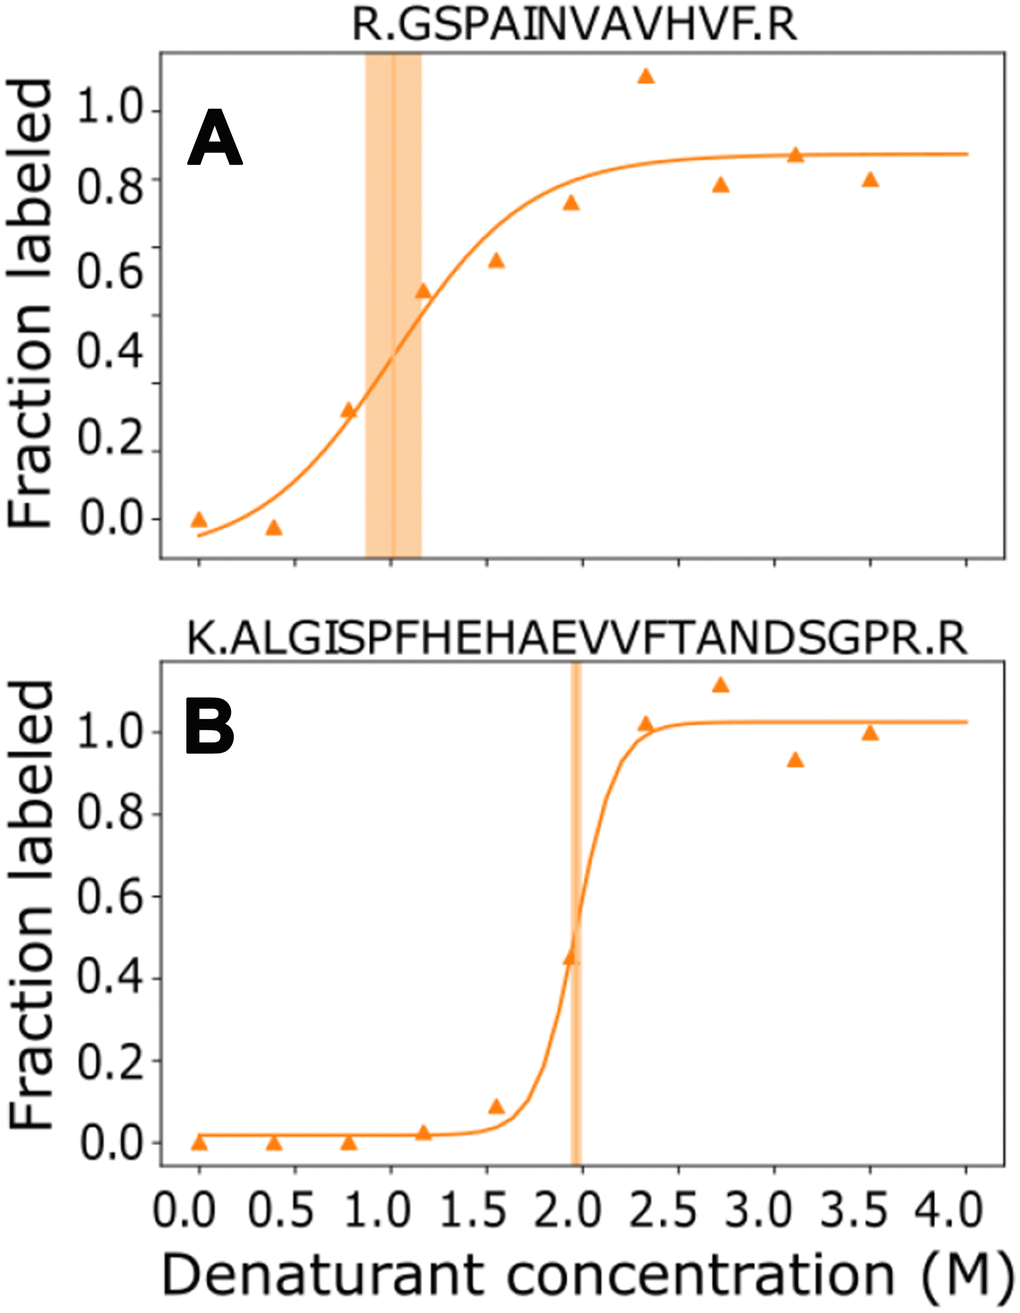 TTR structure causes modified susceptibility to denaturation for different parts of the sequence. Individual measurements (triangles) were fit across the denaturant concentrations to calculate the midpoint (vertical line) and confidence interval of the midpoint (shaded area) for two representative peptides (Panel A: amino acids 43-55, Panel B: amino acids 101-123).